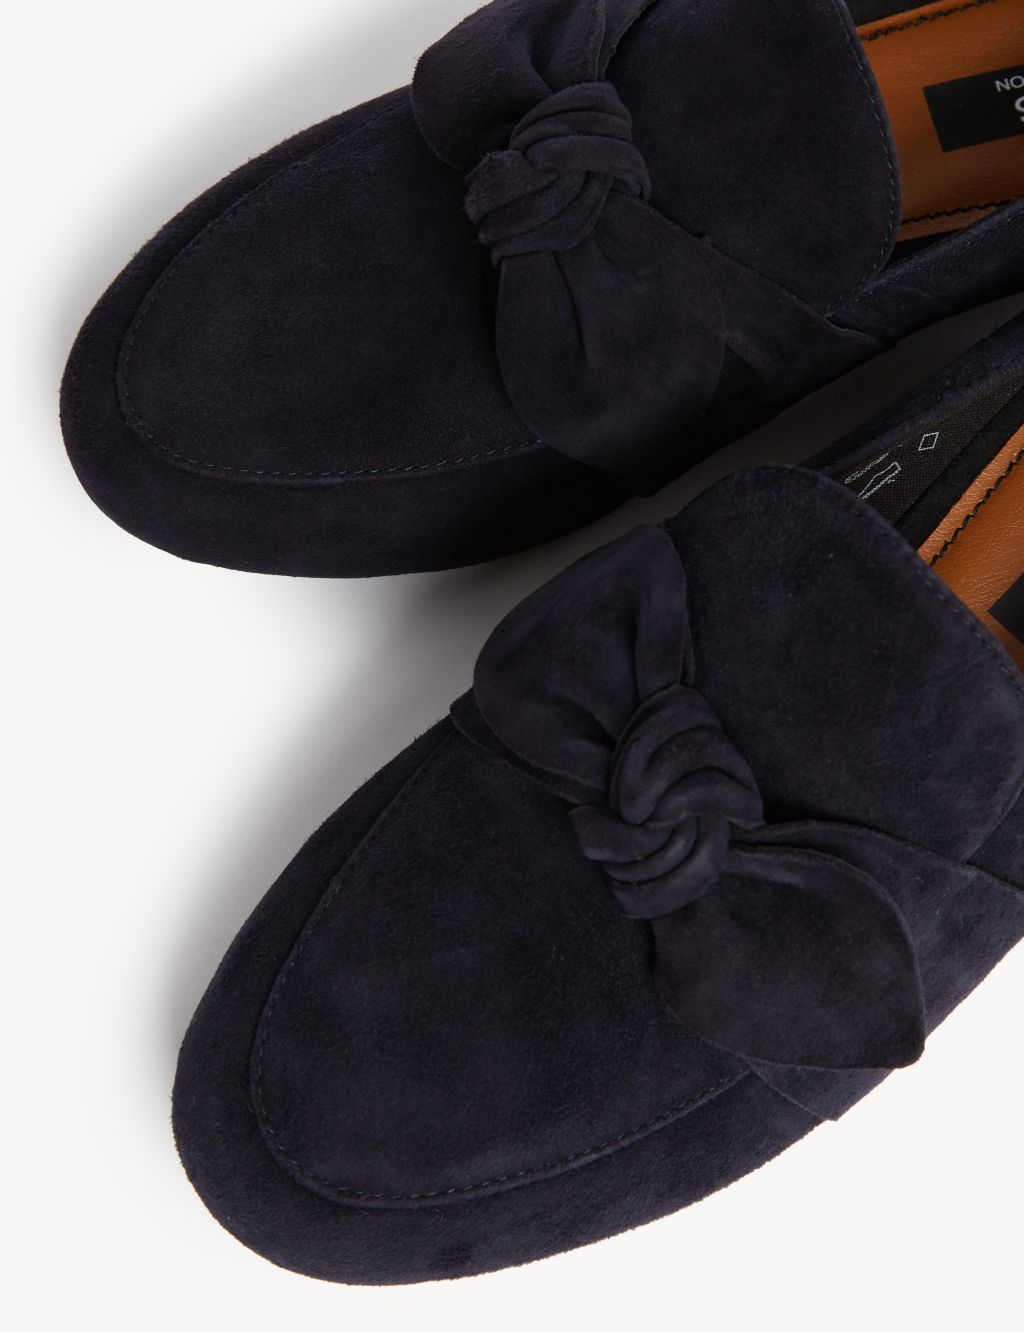 Wide Fit Suede Bow Flat Loafers image 2